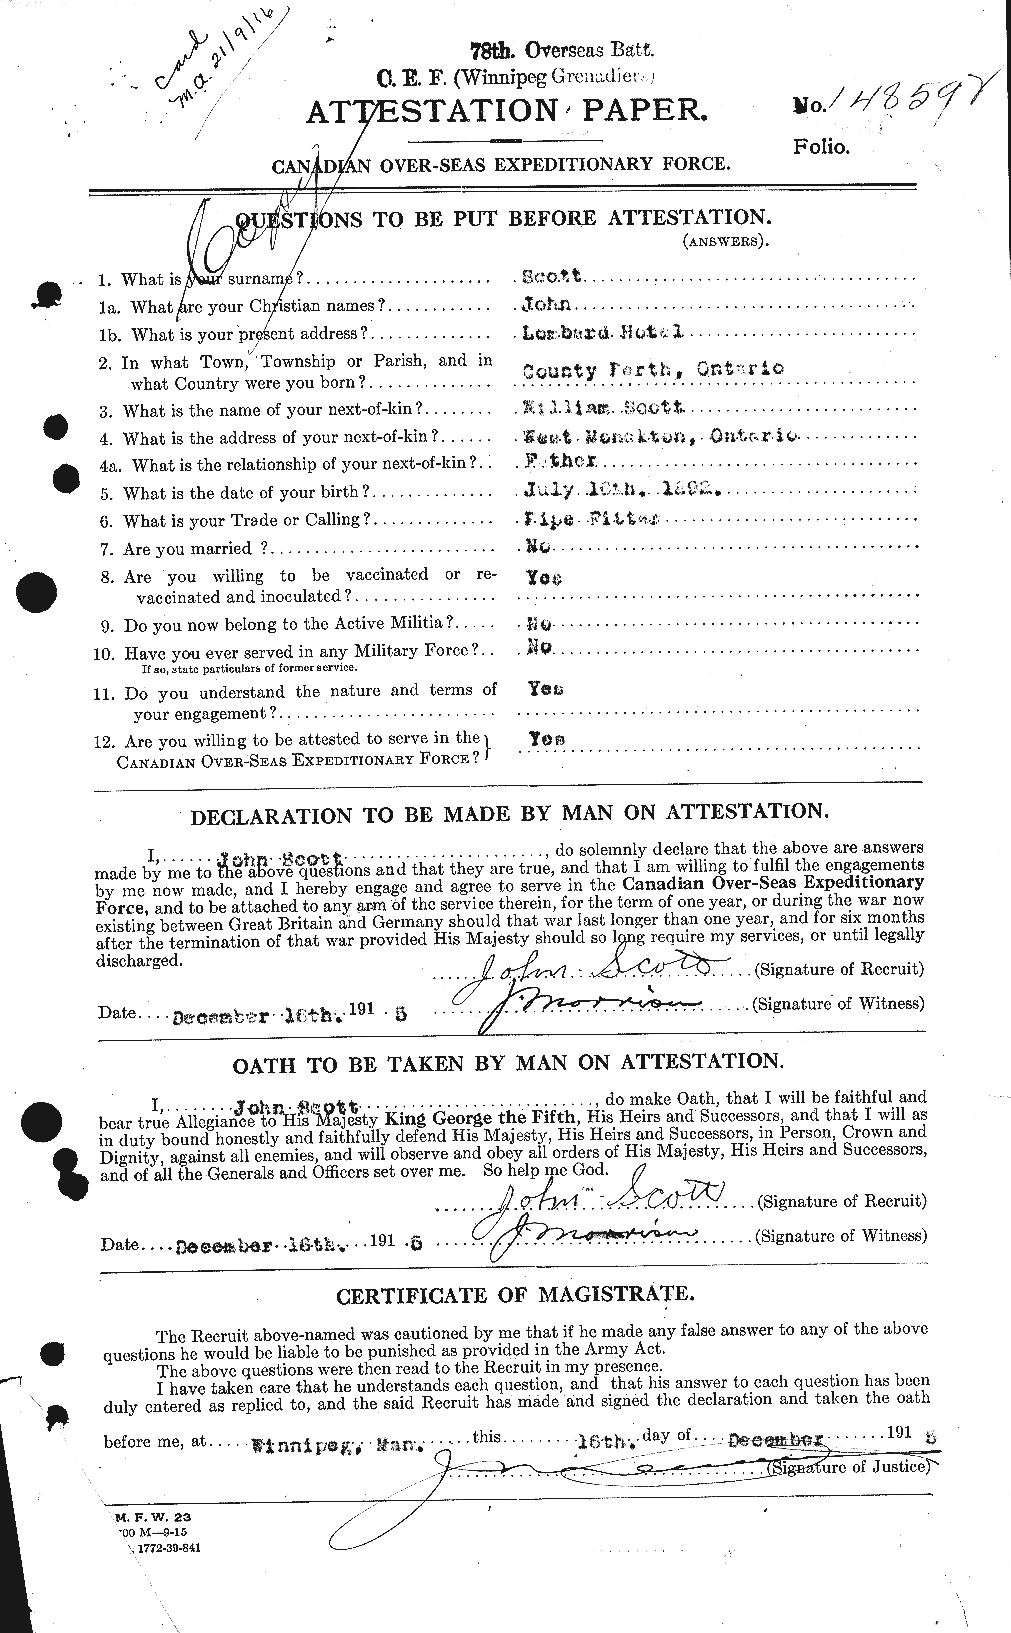 Personnel Records of the First World War - CEF 084888a